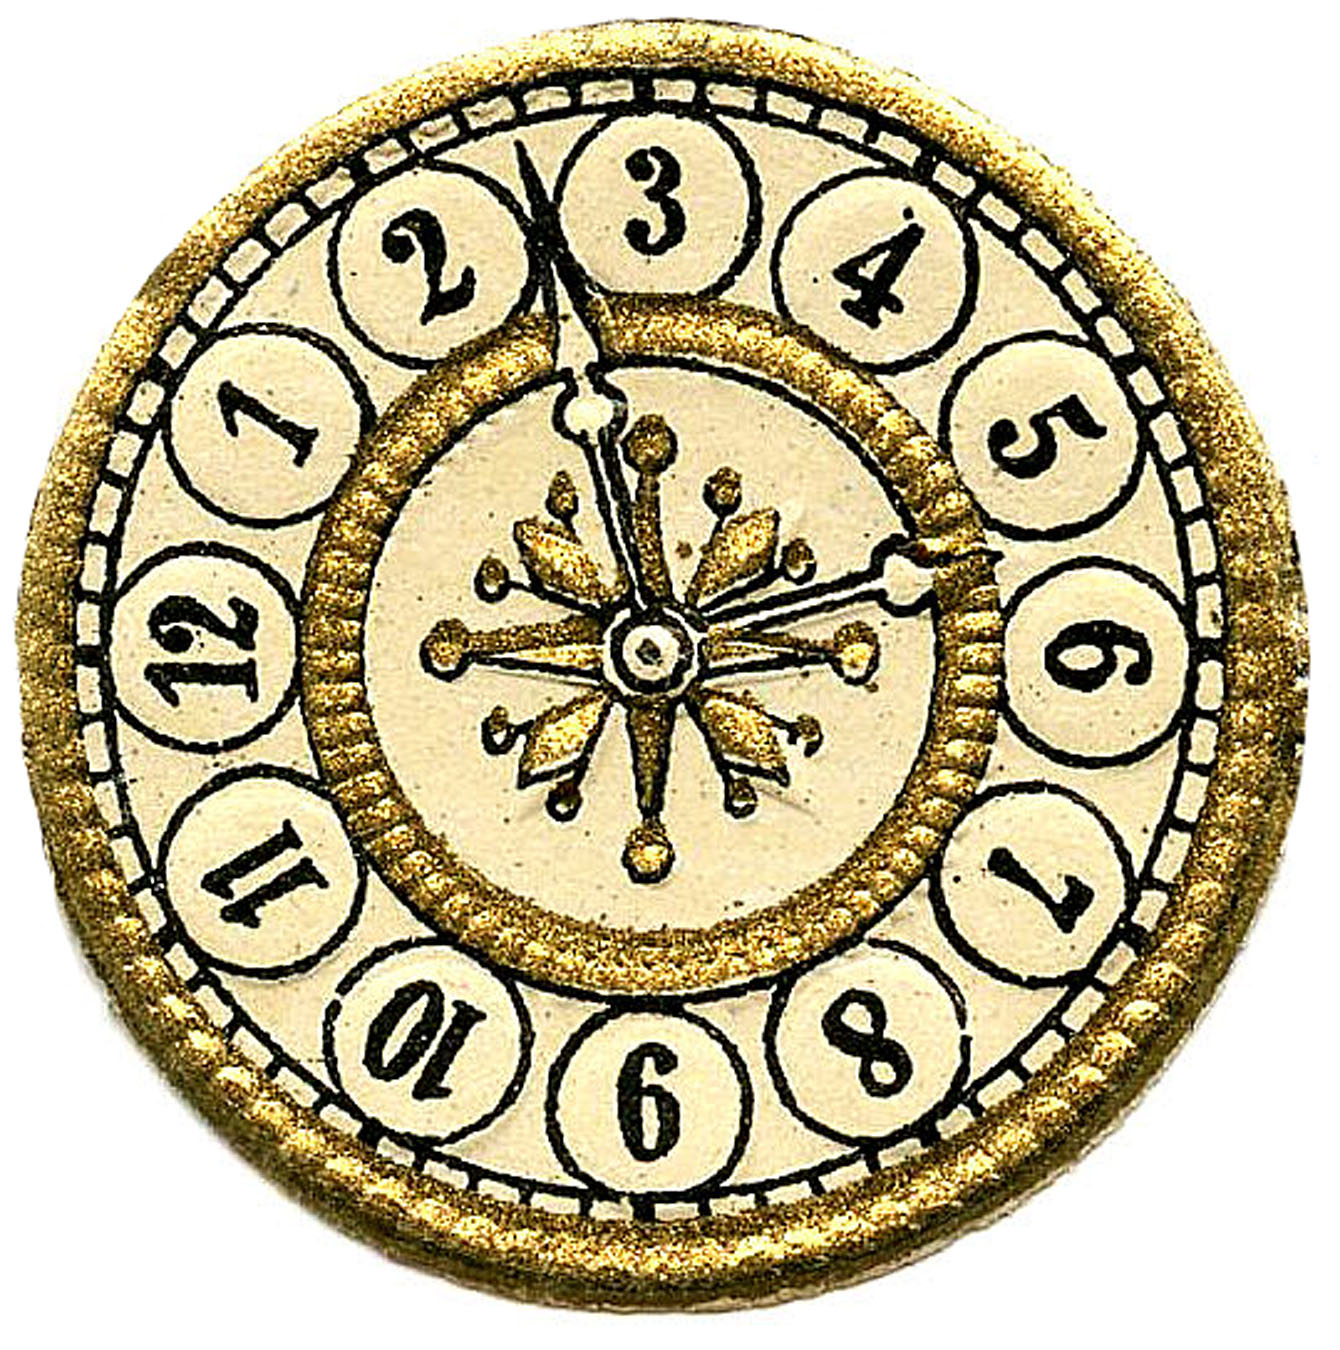 clipart of clock face - photo #11